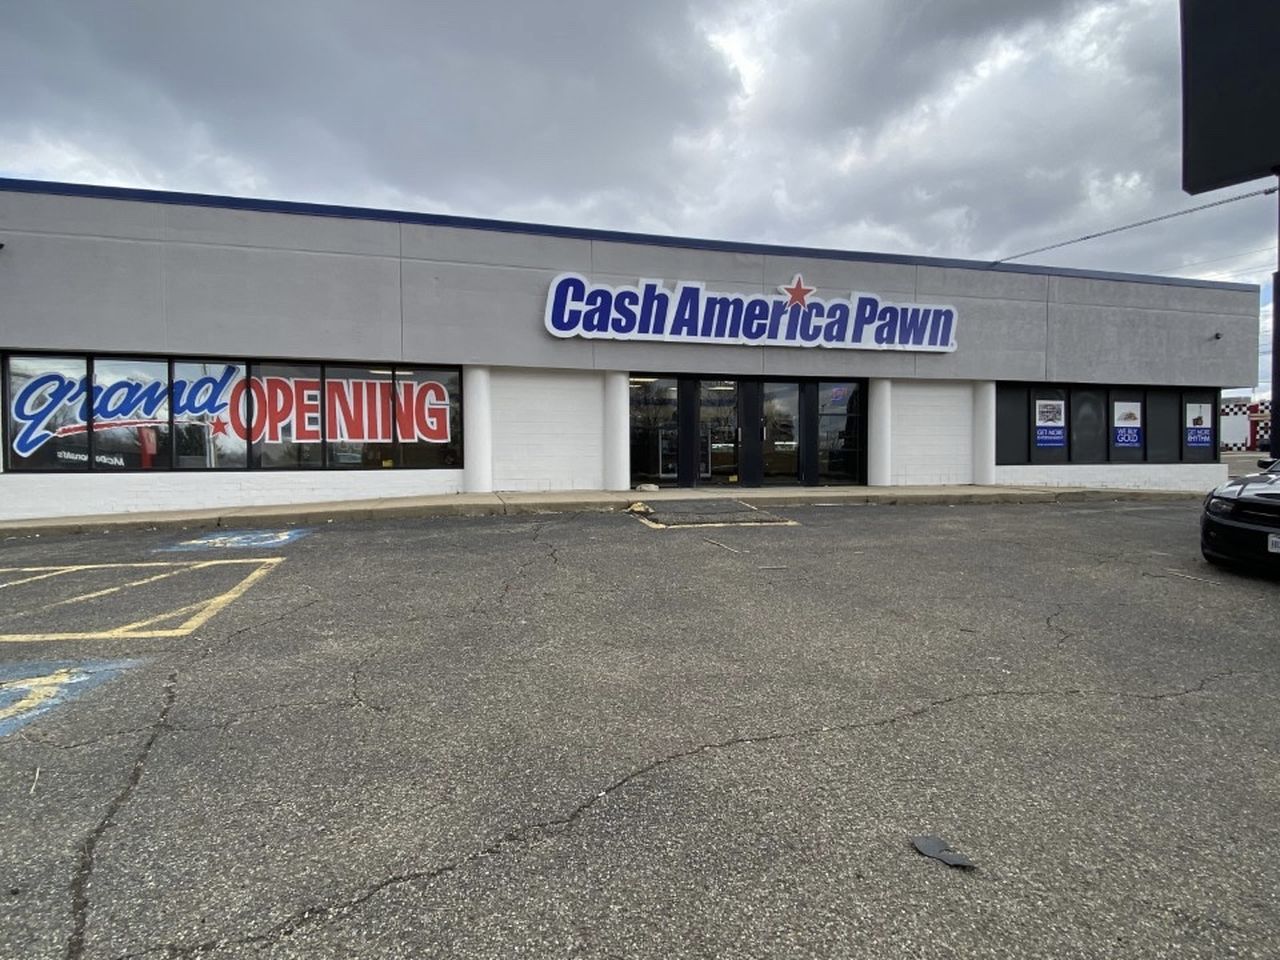 Cash in a Flash! Cash American Pawn is open!